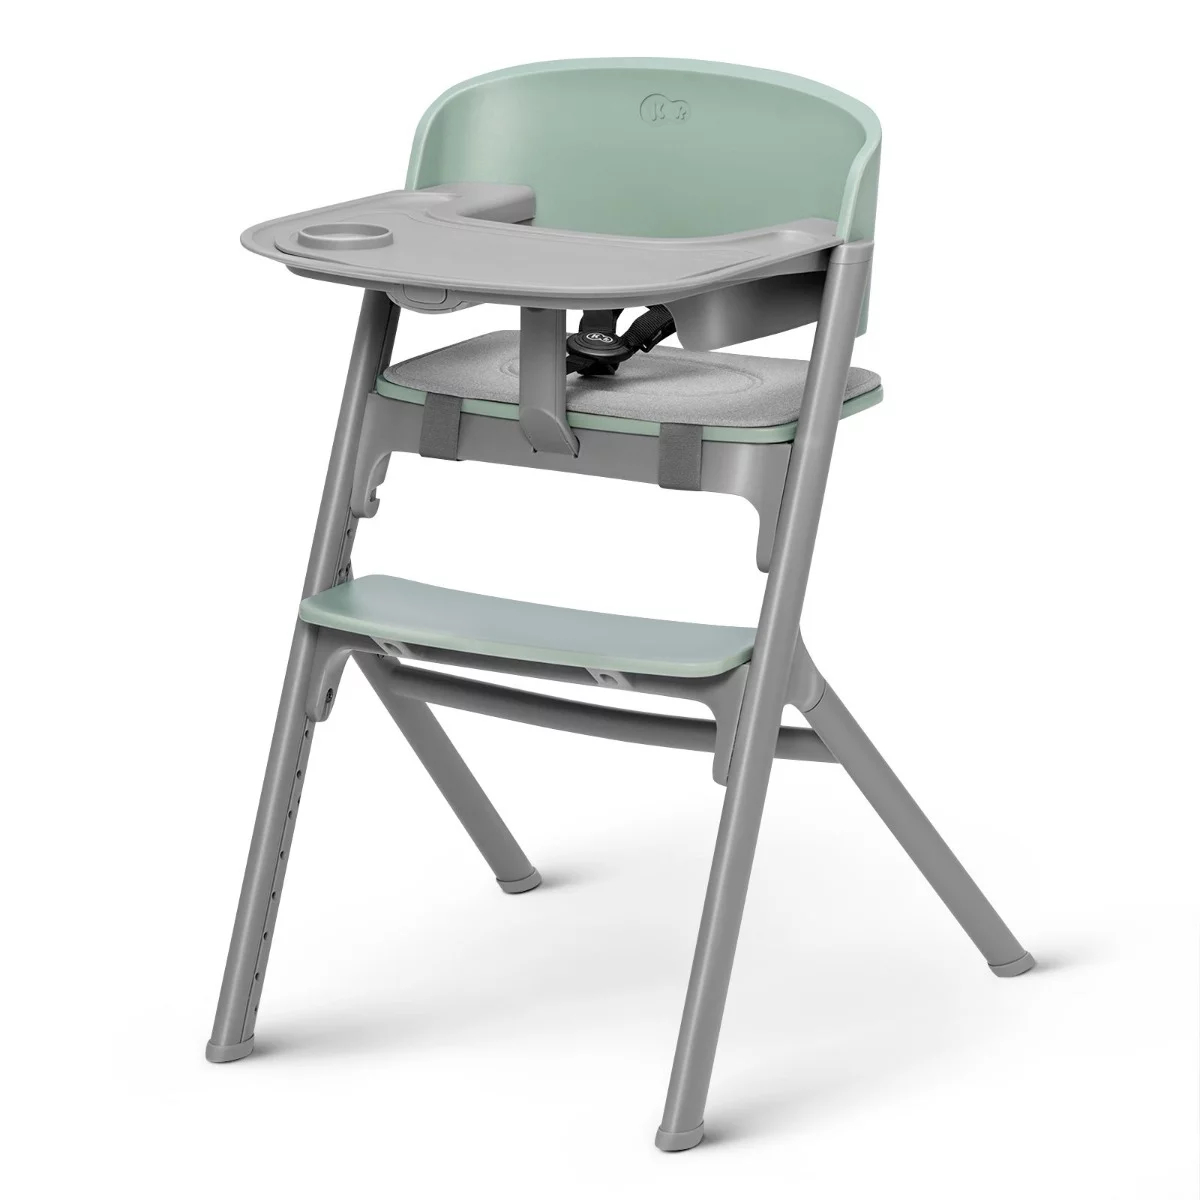 Kinderkraft 3 in 1 LIVY High Chair with Tray